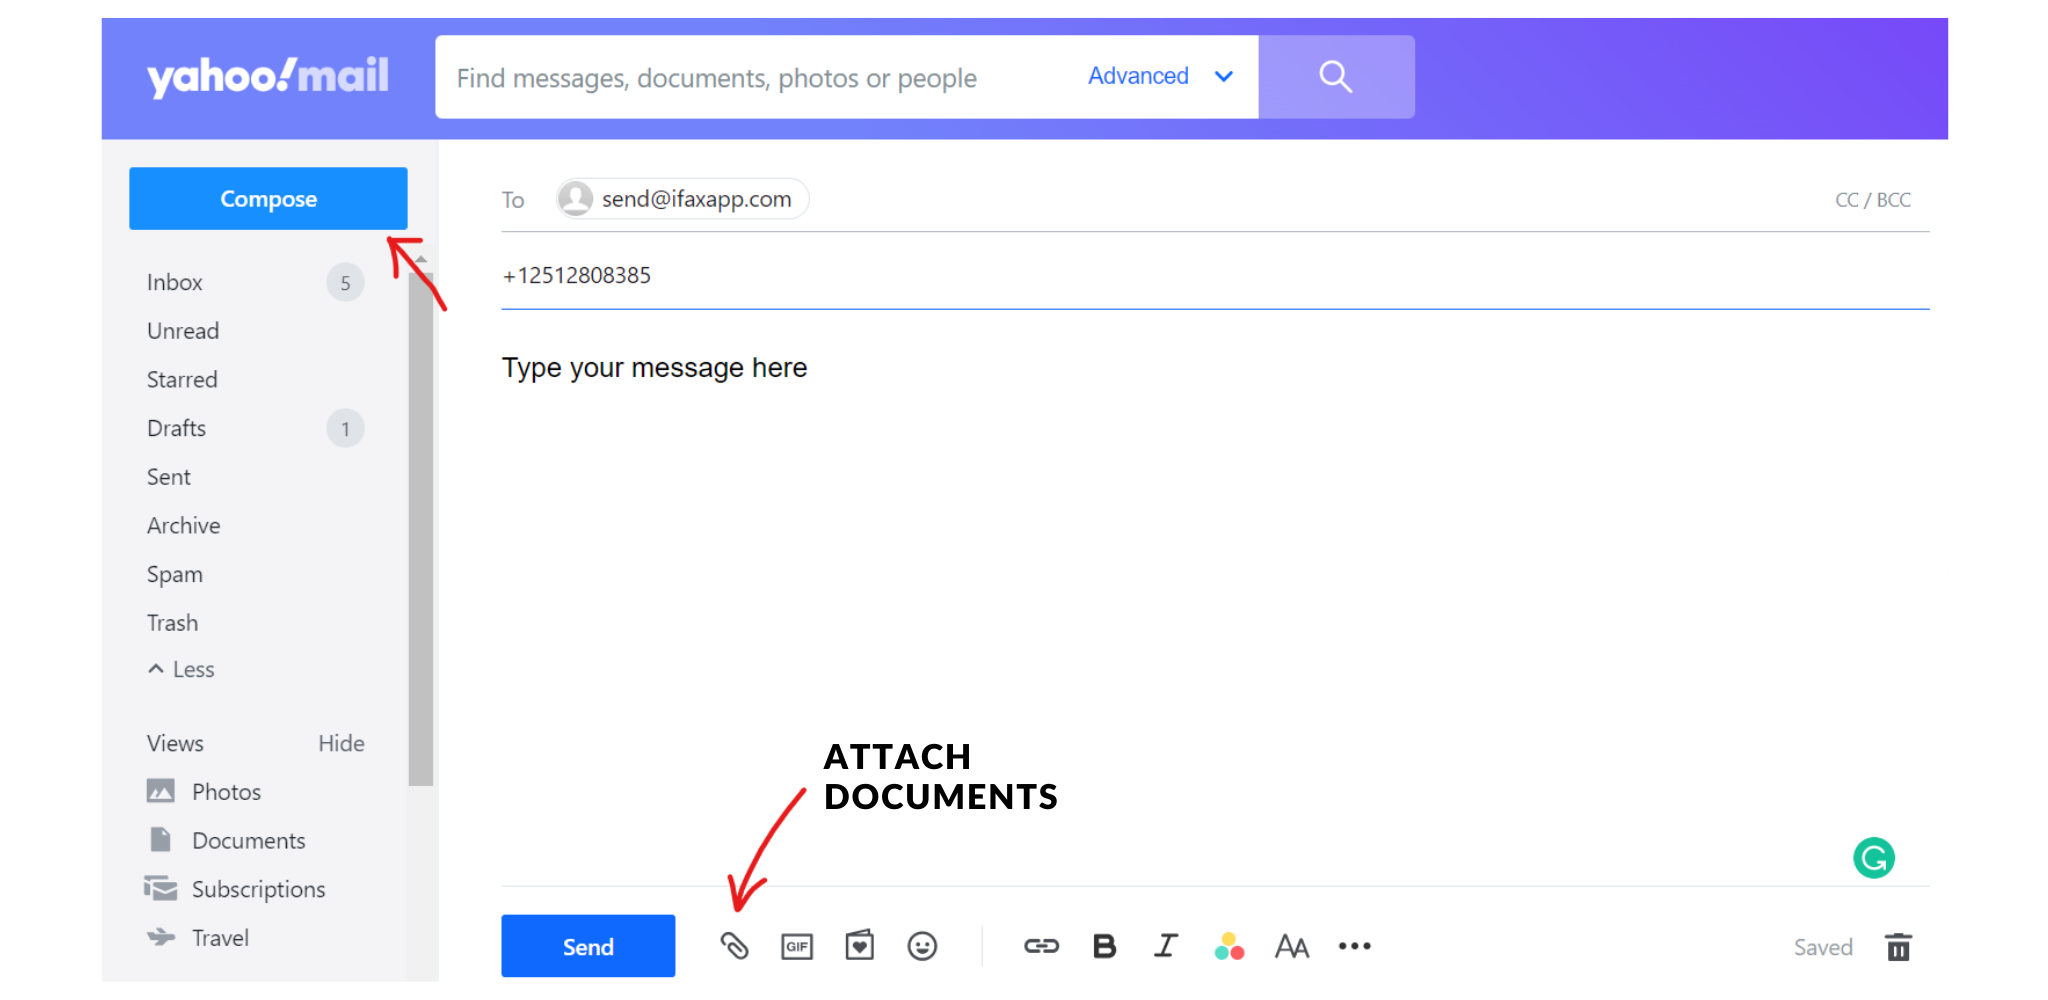 How to Send an Attachment With Yahoo Mail